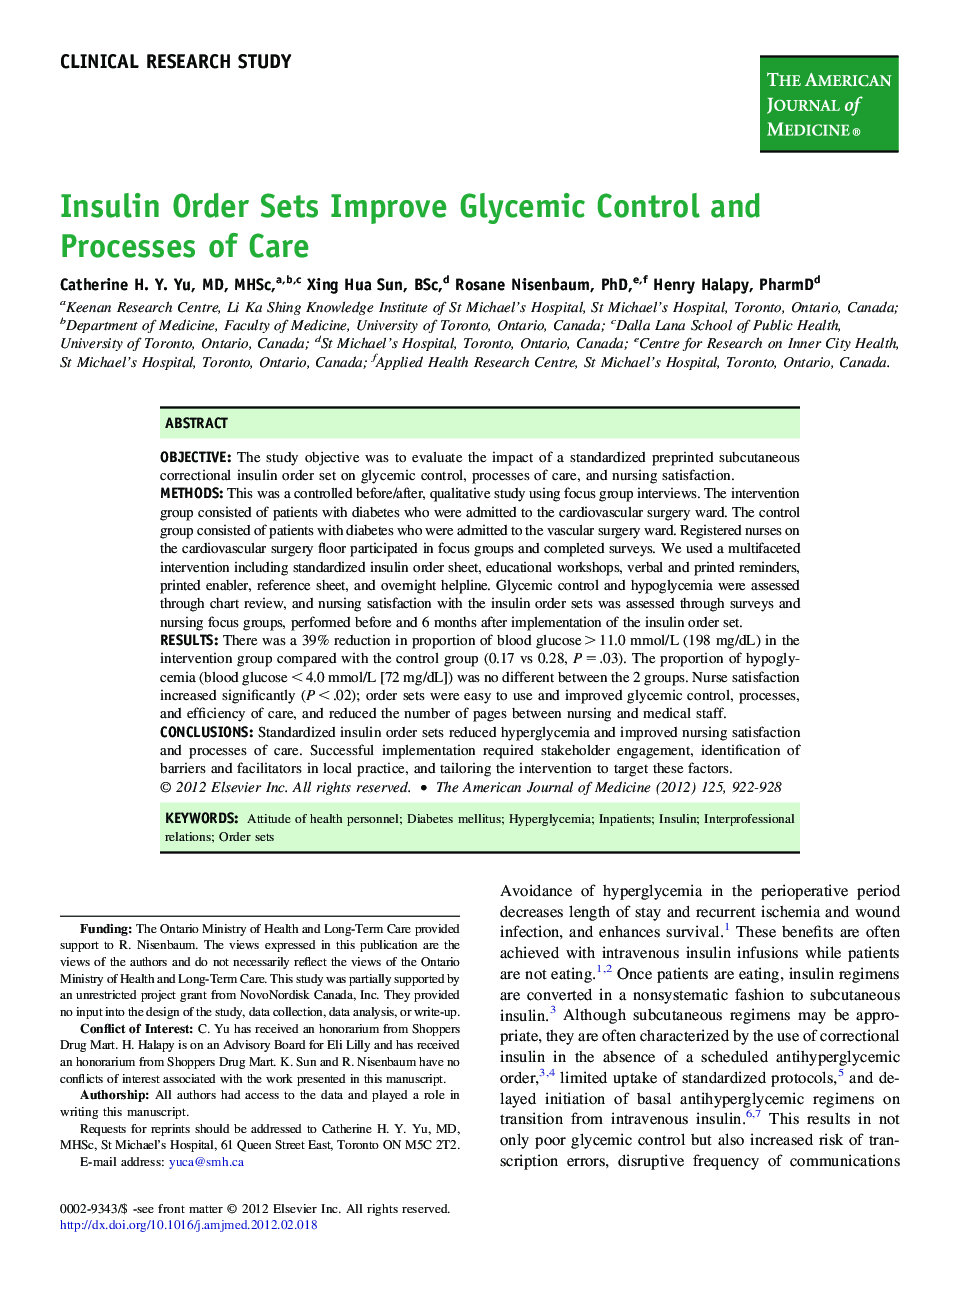 Insulin Order Sets Improve Glycemic Control and Processes of Care